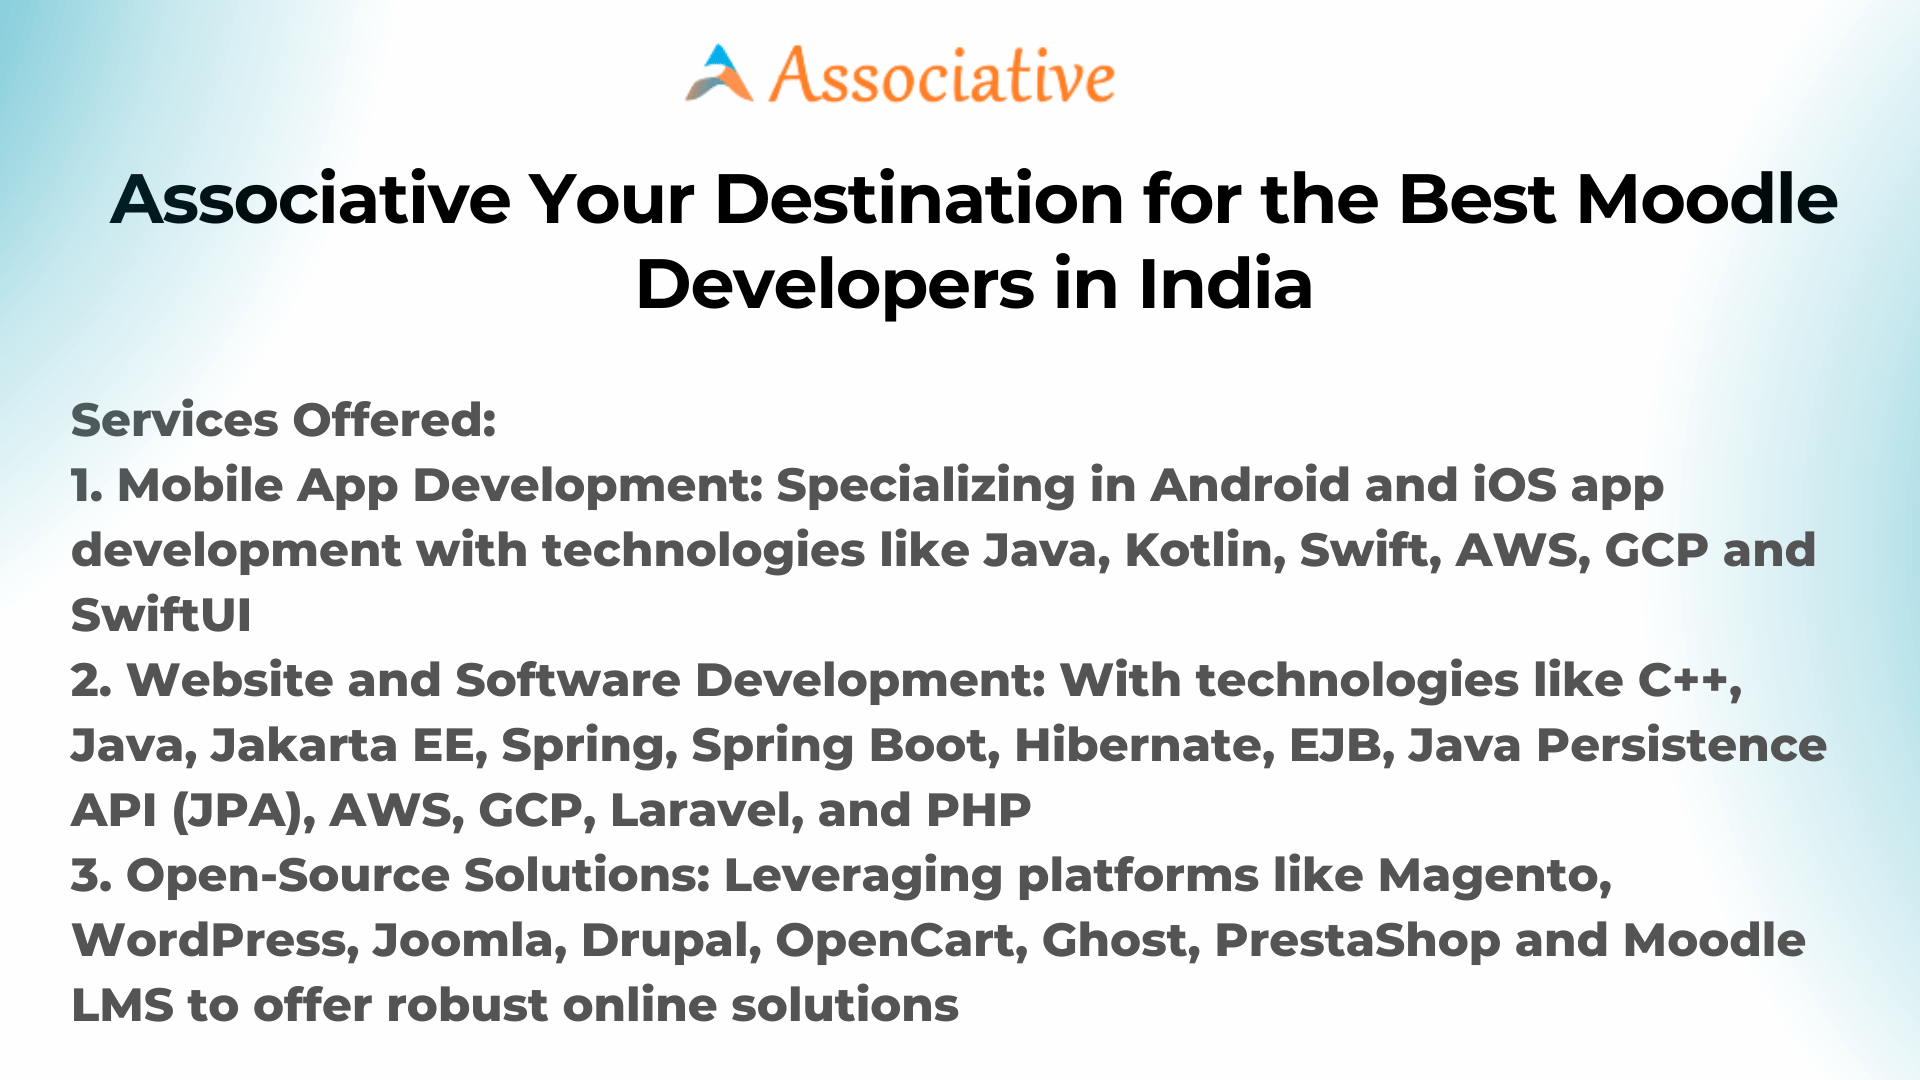 Associative Your Destination for the Best Moodle Developers in India